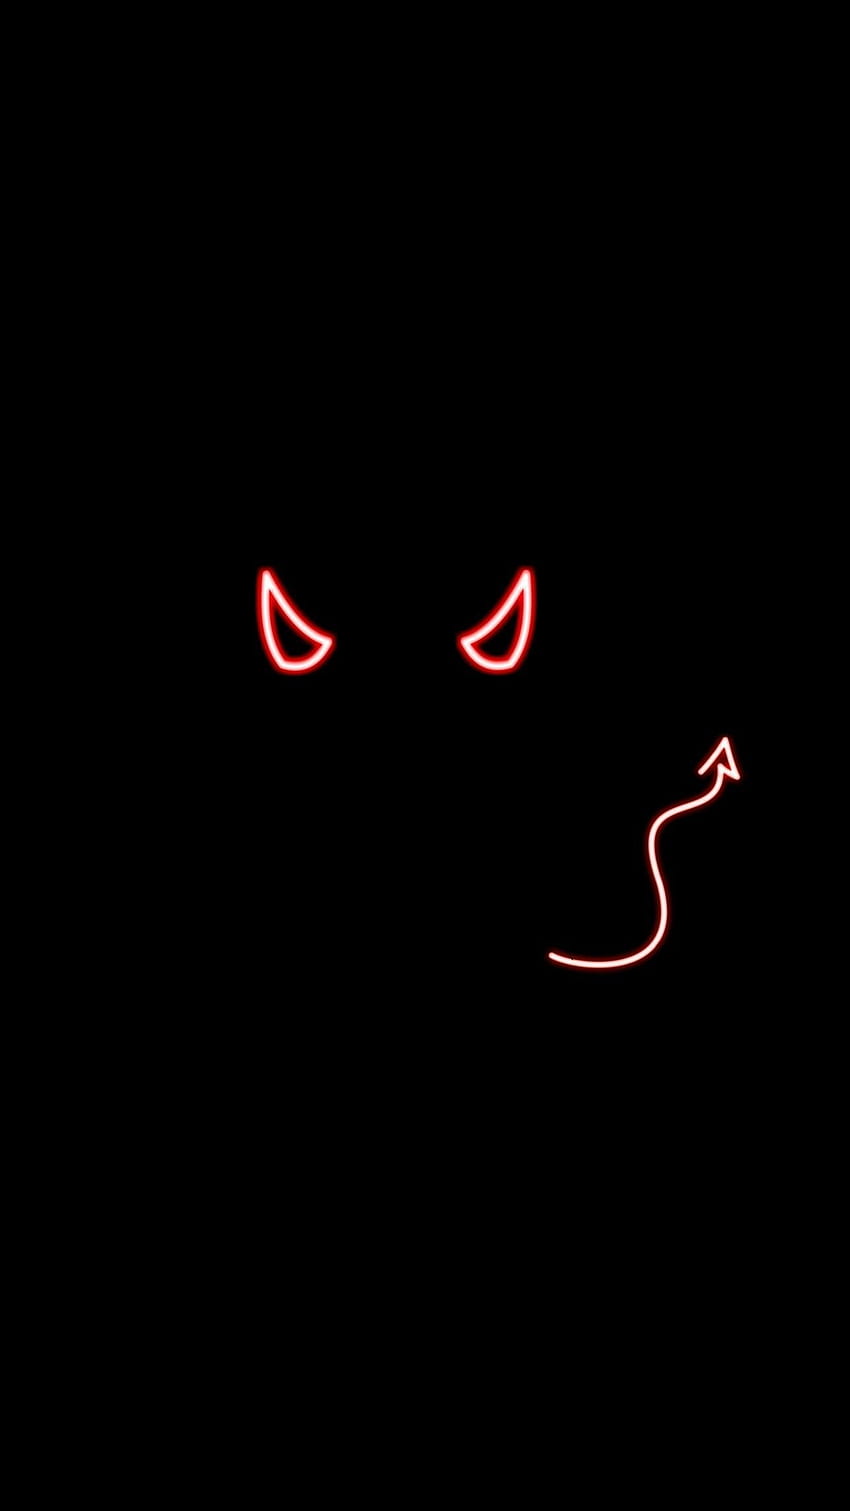 A black background with red eyes and horns - Glitch